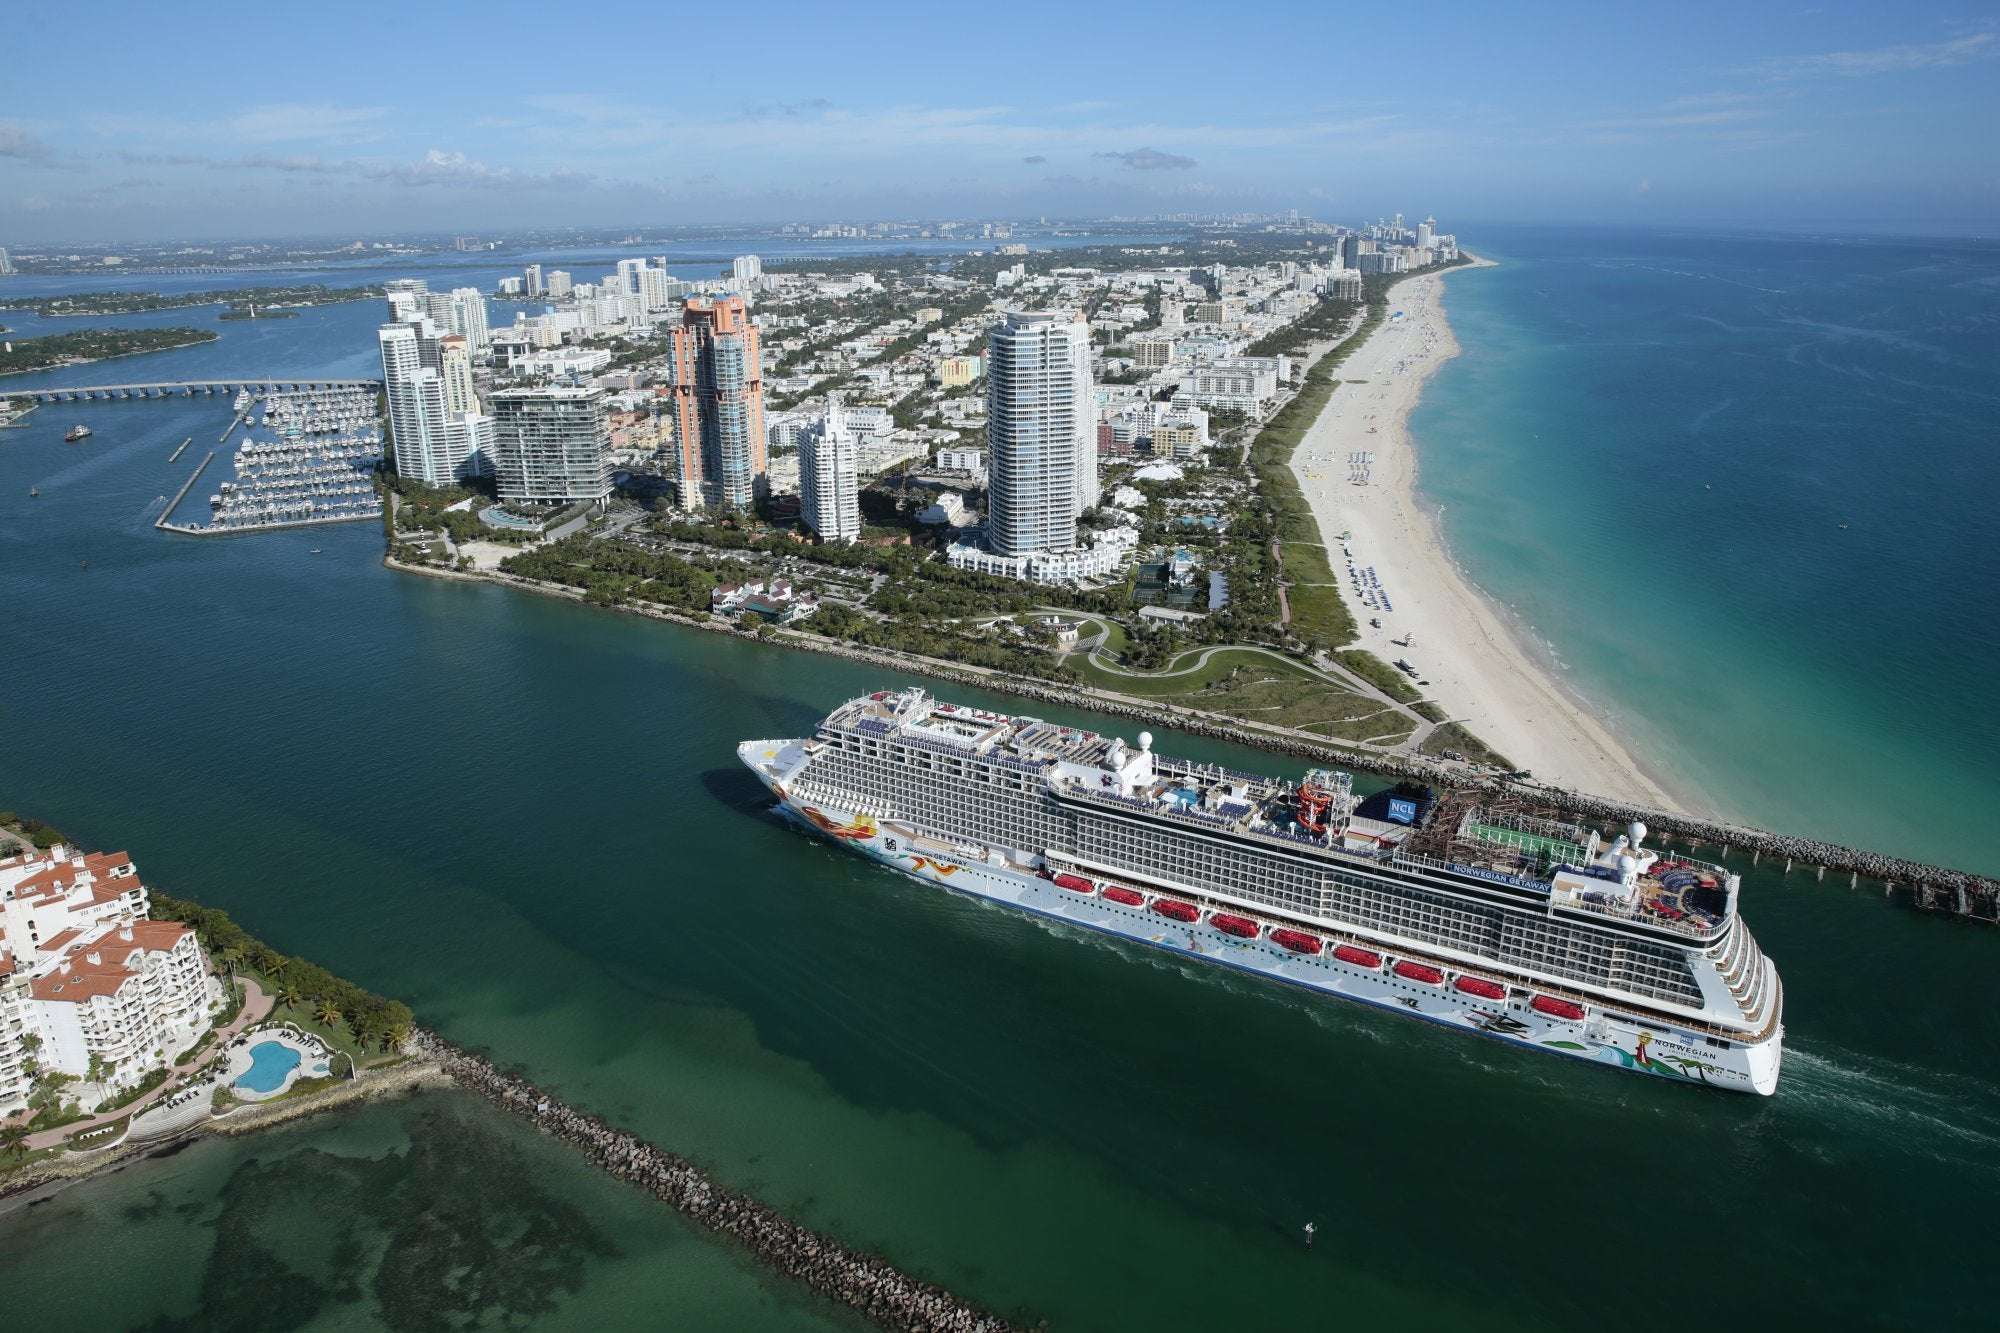 Miami cruise port guide: Everything to know about hotels ...